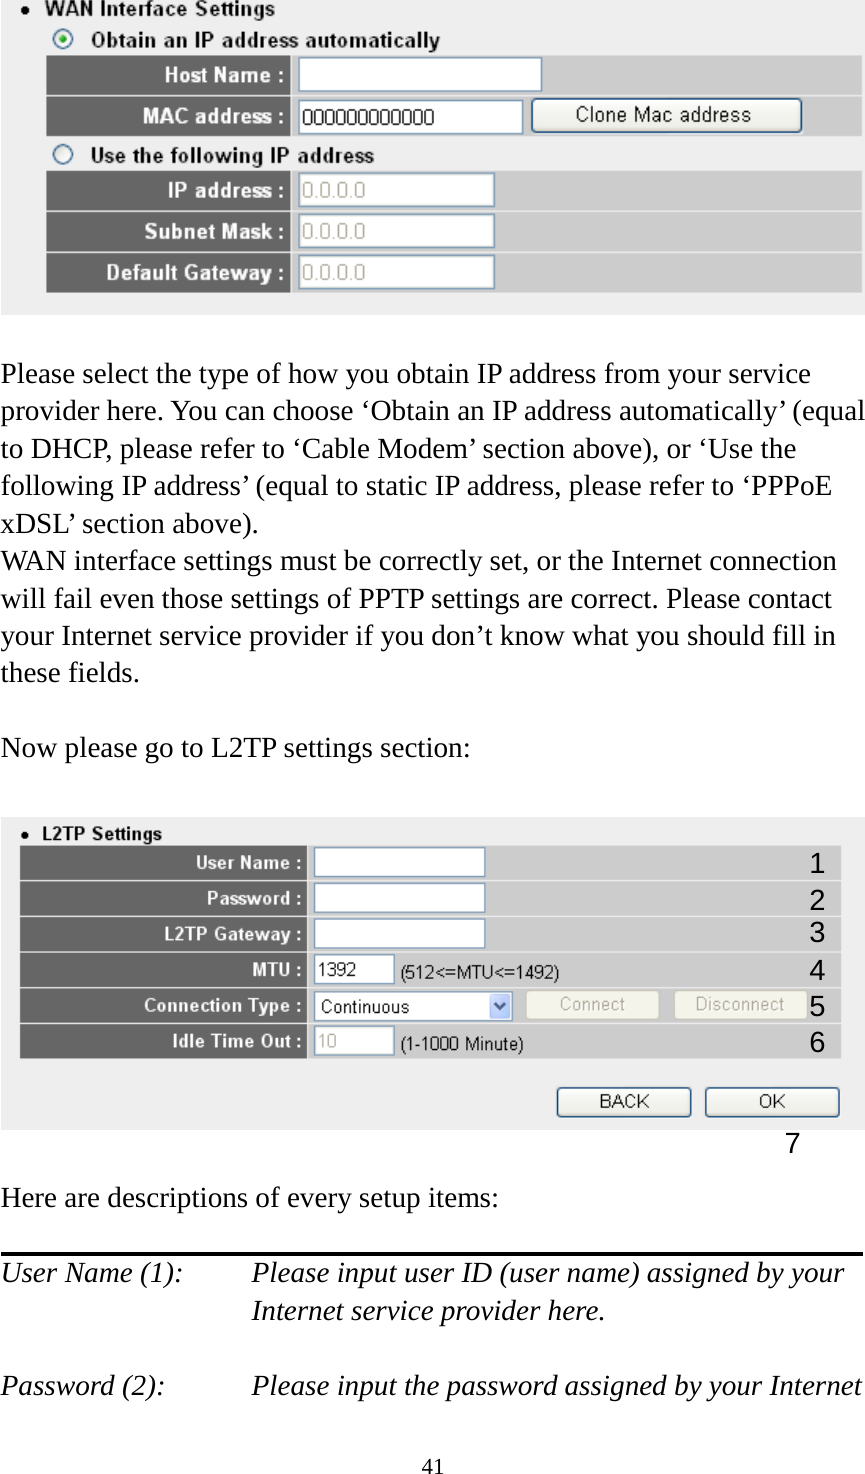 41   Please select the type of how you obtain IP address from your service provider here. You can choose ‘Obtain an IP address automatically’ (equal to DHCP, please refer to ‘Cable Modem’ section above), or ‘Use the following IP address’ (equal to static IP address, please refer to ‘PPPoE xDSL’ section above).   WAN interface settings must be correctly set, or the Internet connection will fail even those settings of PPTP settings are correct. Please contact your Internet service provider if you don’t know what you should fill in these fields.  Now please go to L2TP settings section:    Here are descriptions of every setup items:  User Name (1):     Please input user ID (user name) assigned by your      Internet service provider here.  Password (2):   Please input the password assigned by your Internet 1 2 4 3 5 7 6 